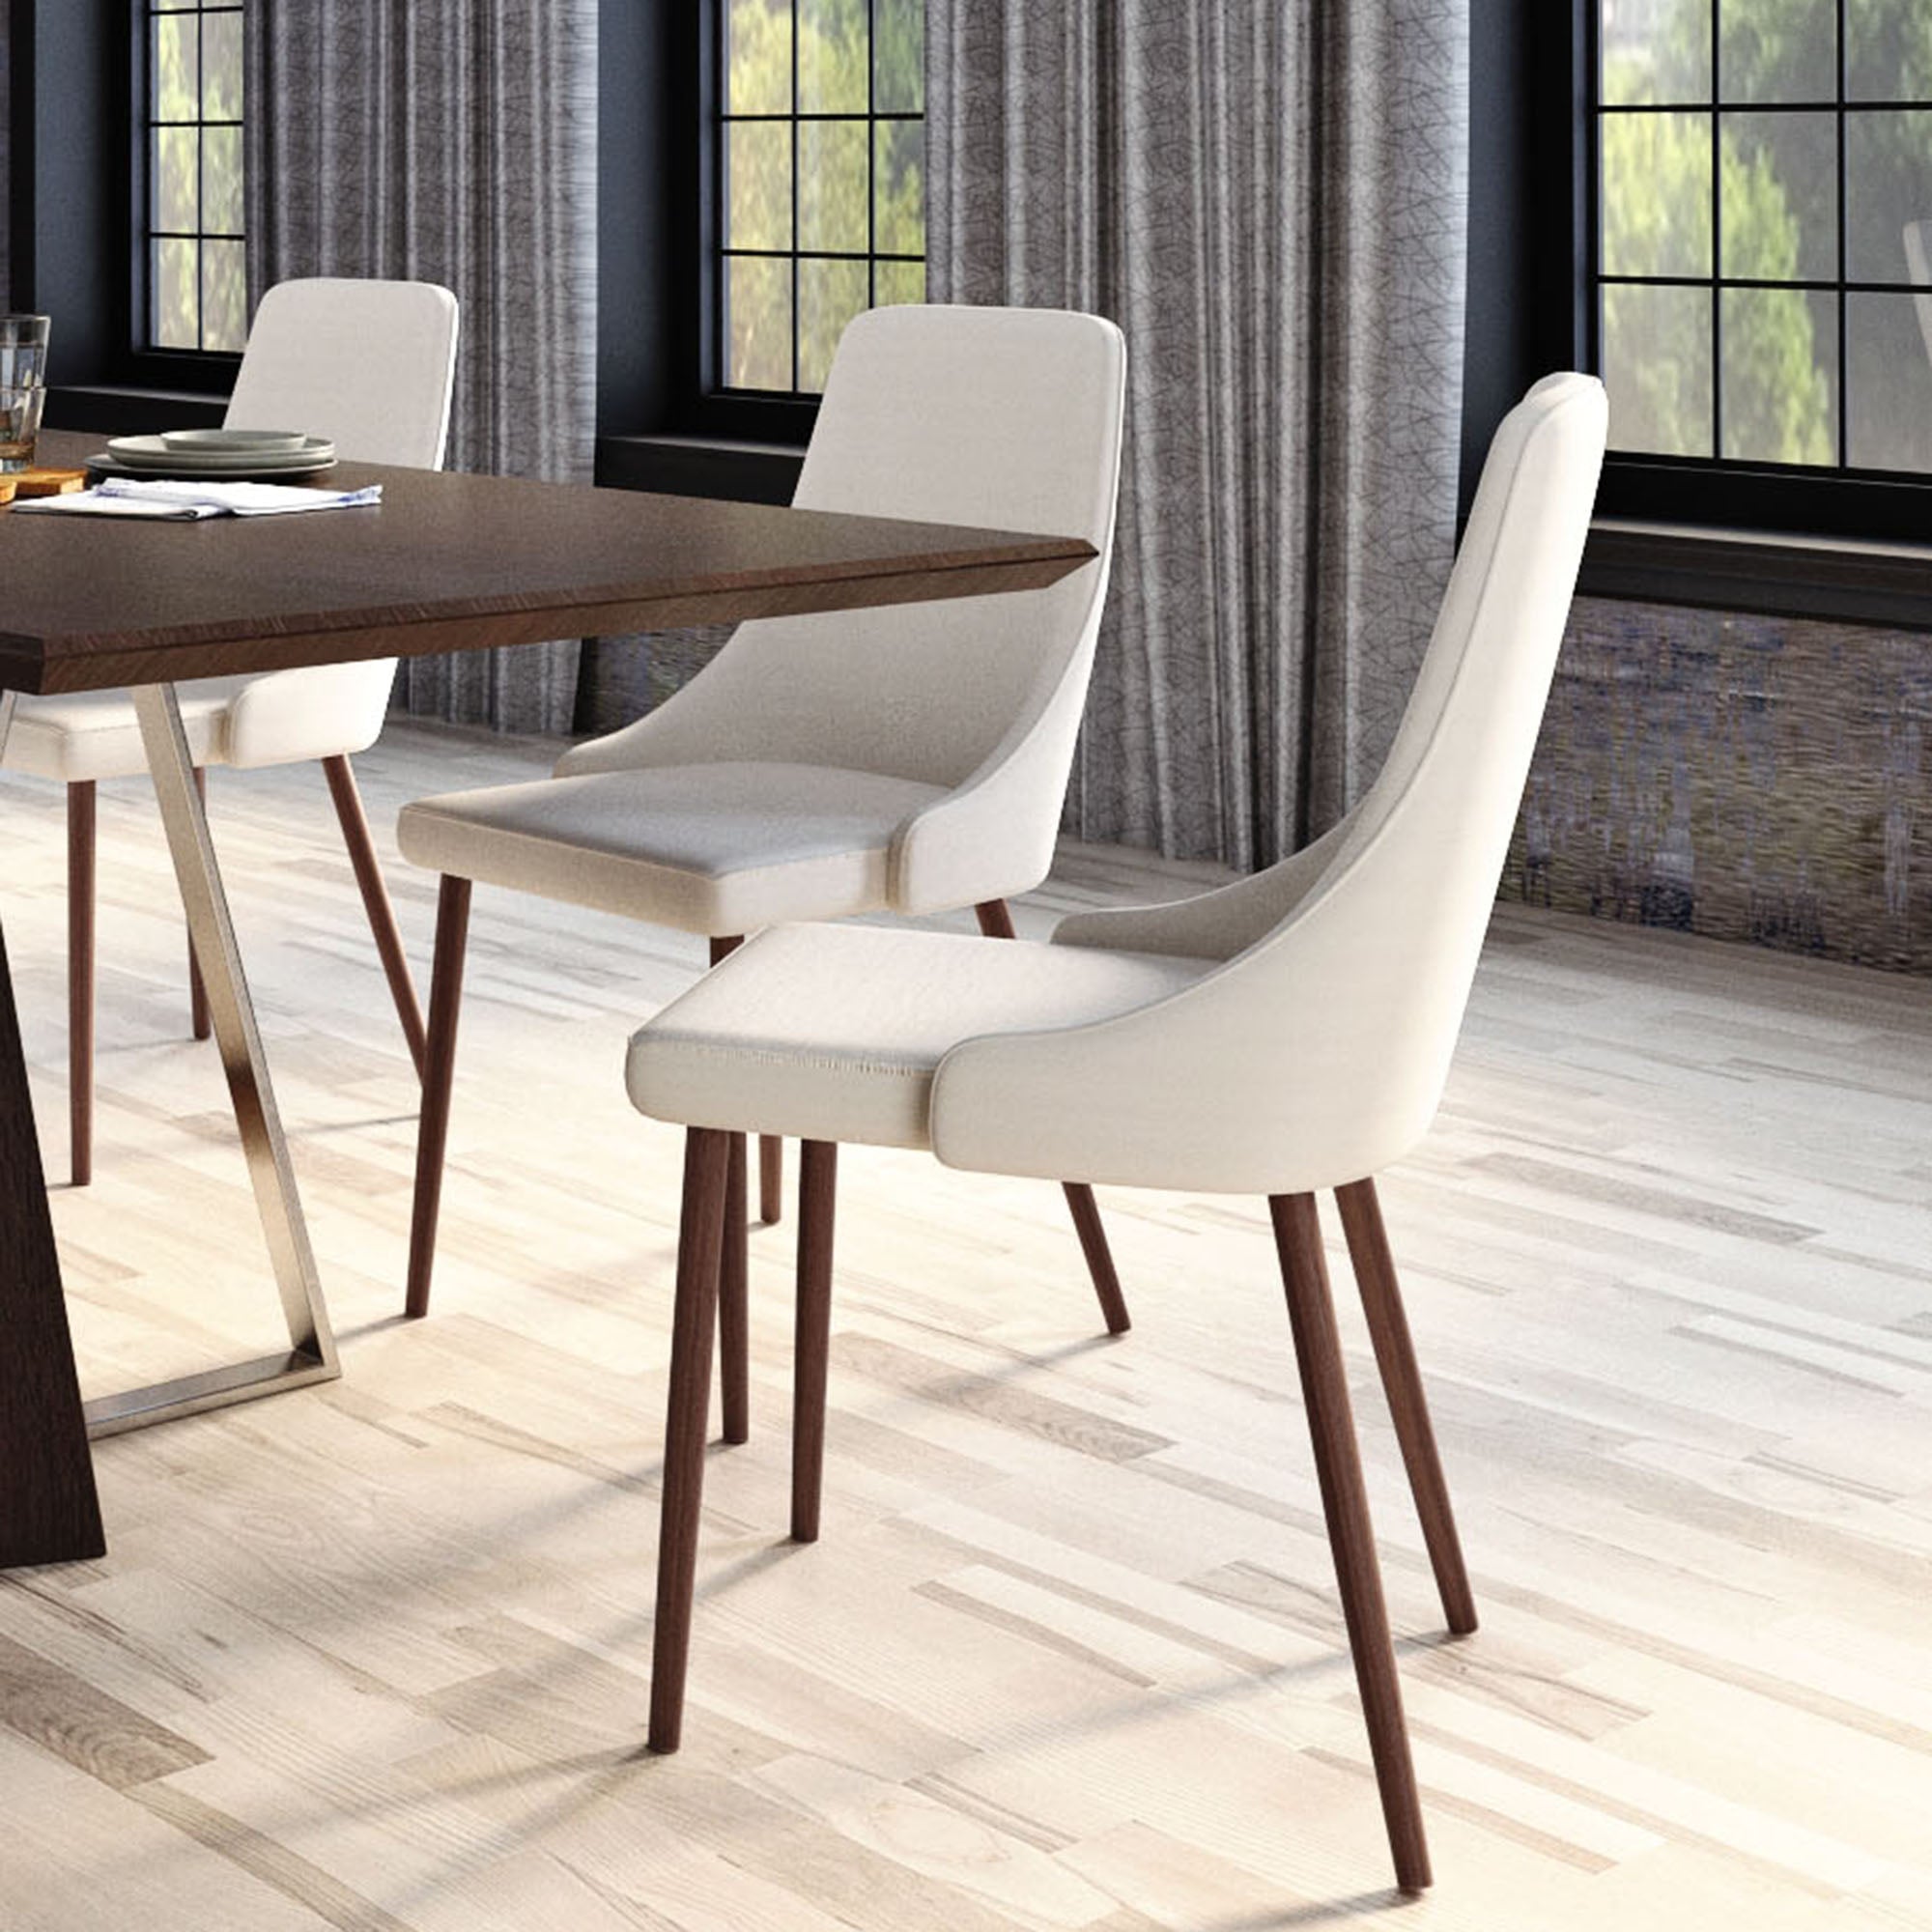 DRAKE 71" DINING TABLE / CORA BEIGE CHAIRS - 7PC DINING SET